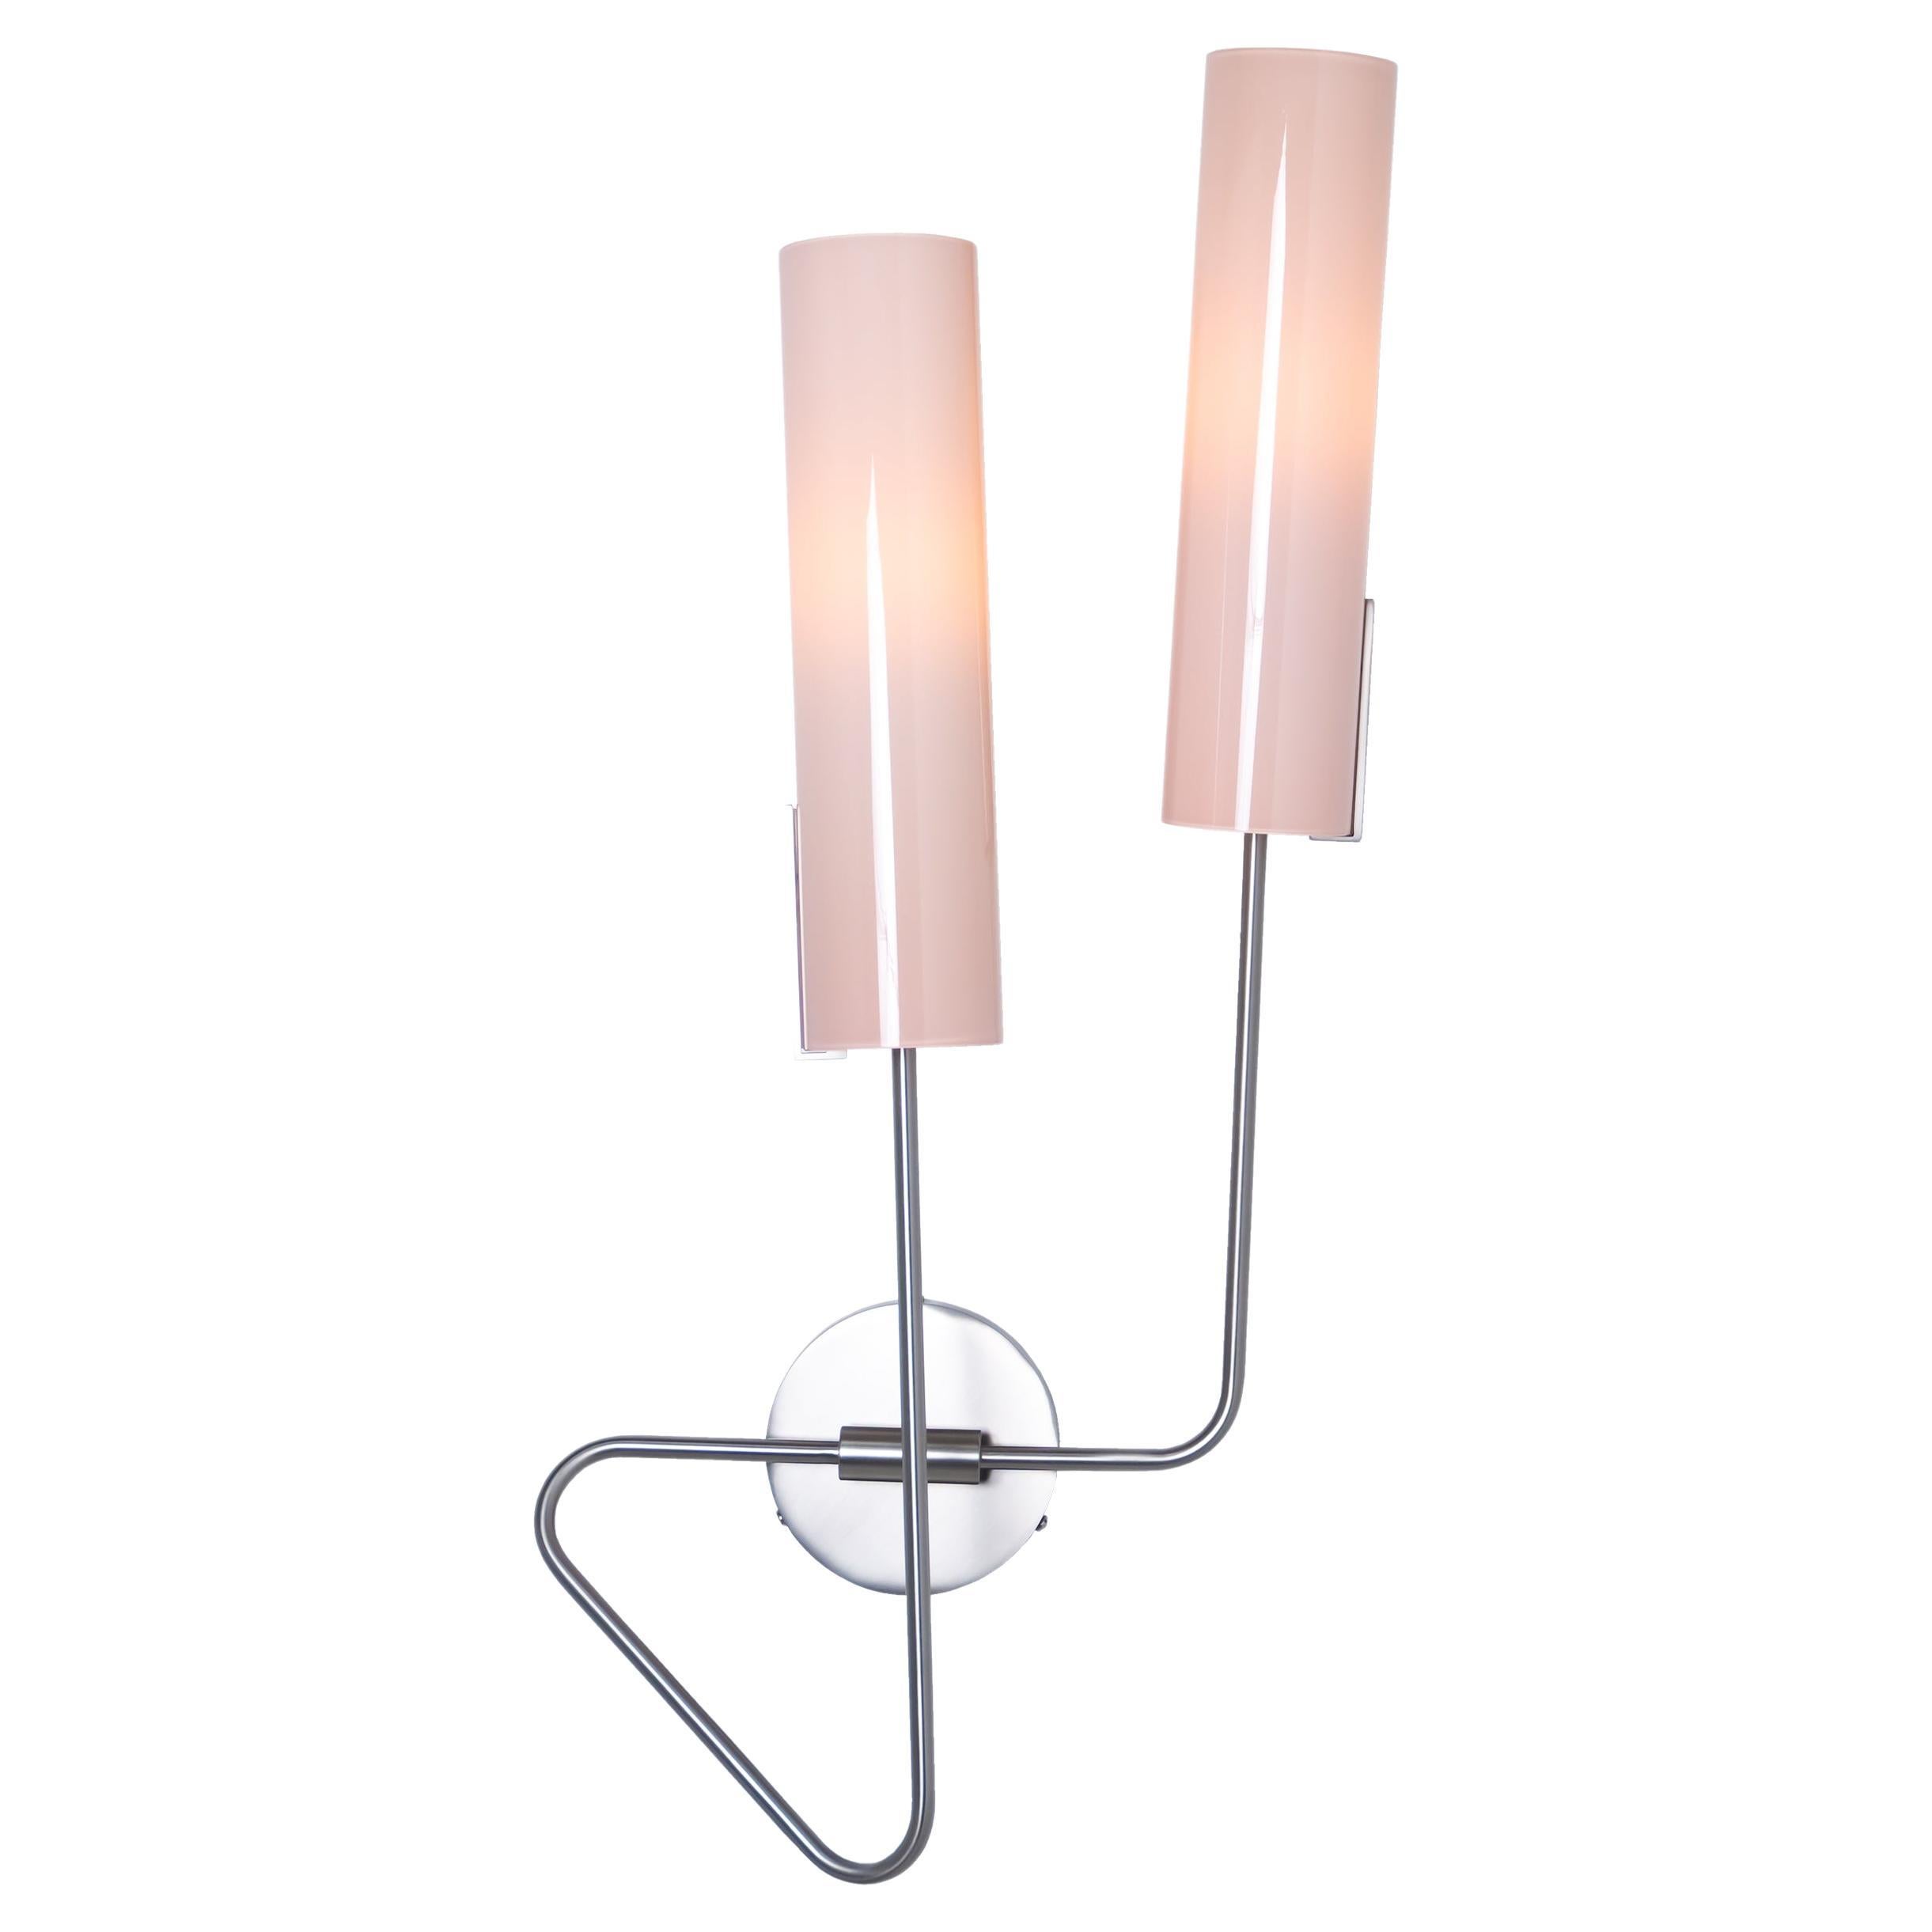 Modern Continuum 01 Sconce: Satin Nickel/Slate Ombre Glass Shades by Avram Rusu Studio For Sale